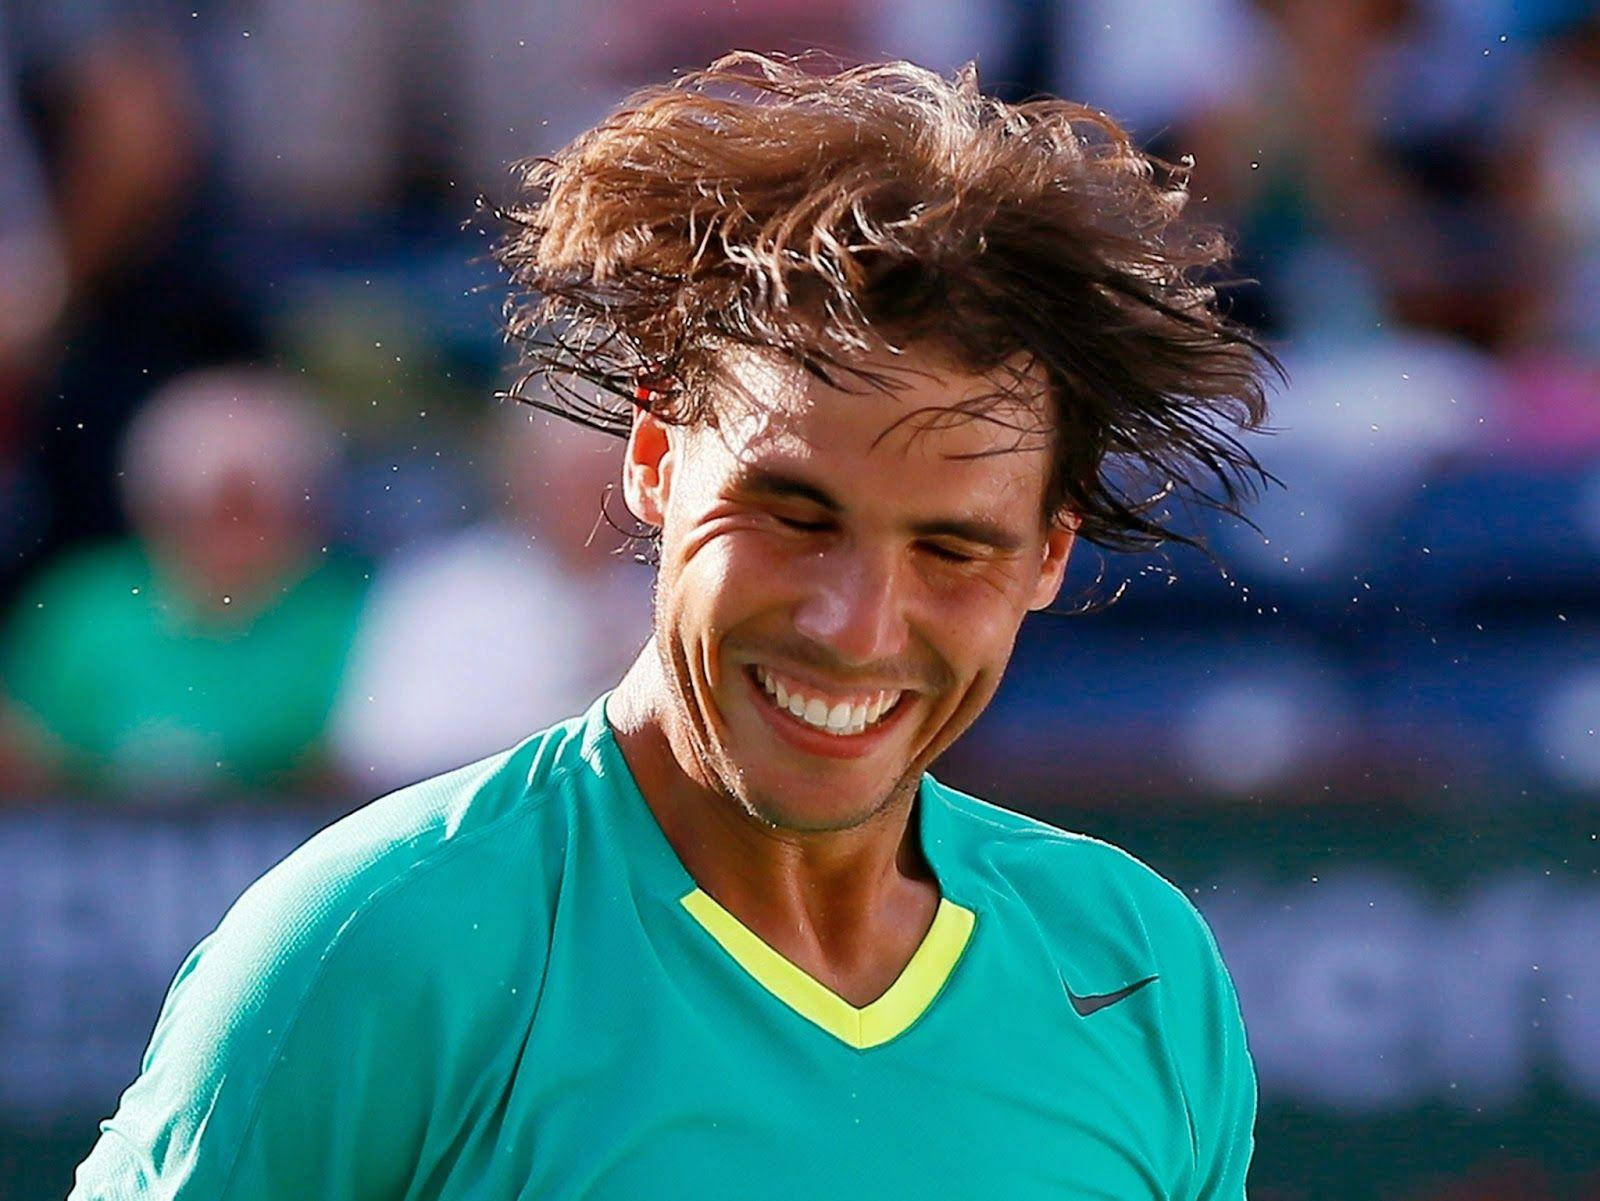 French Open Smiling Rafael Nadal Background